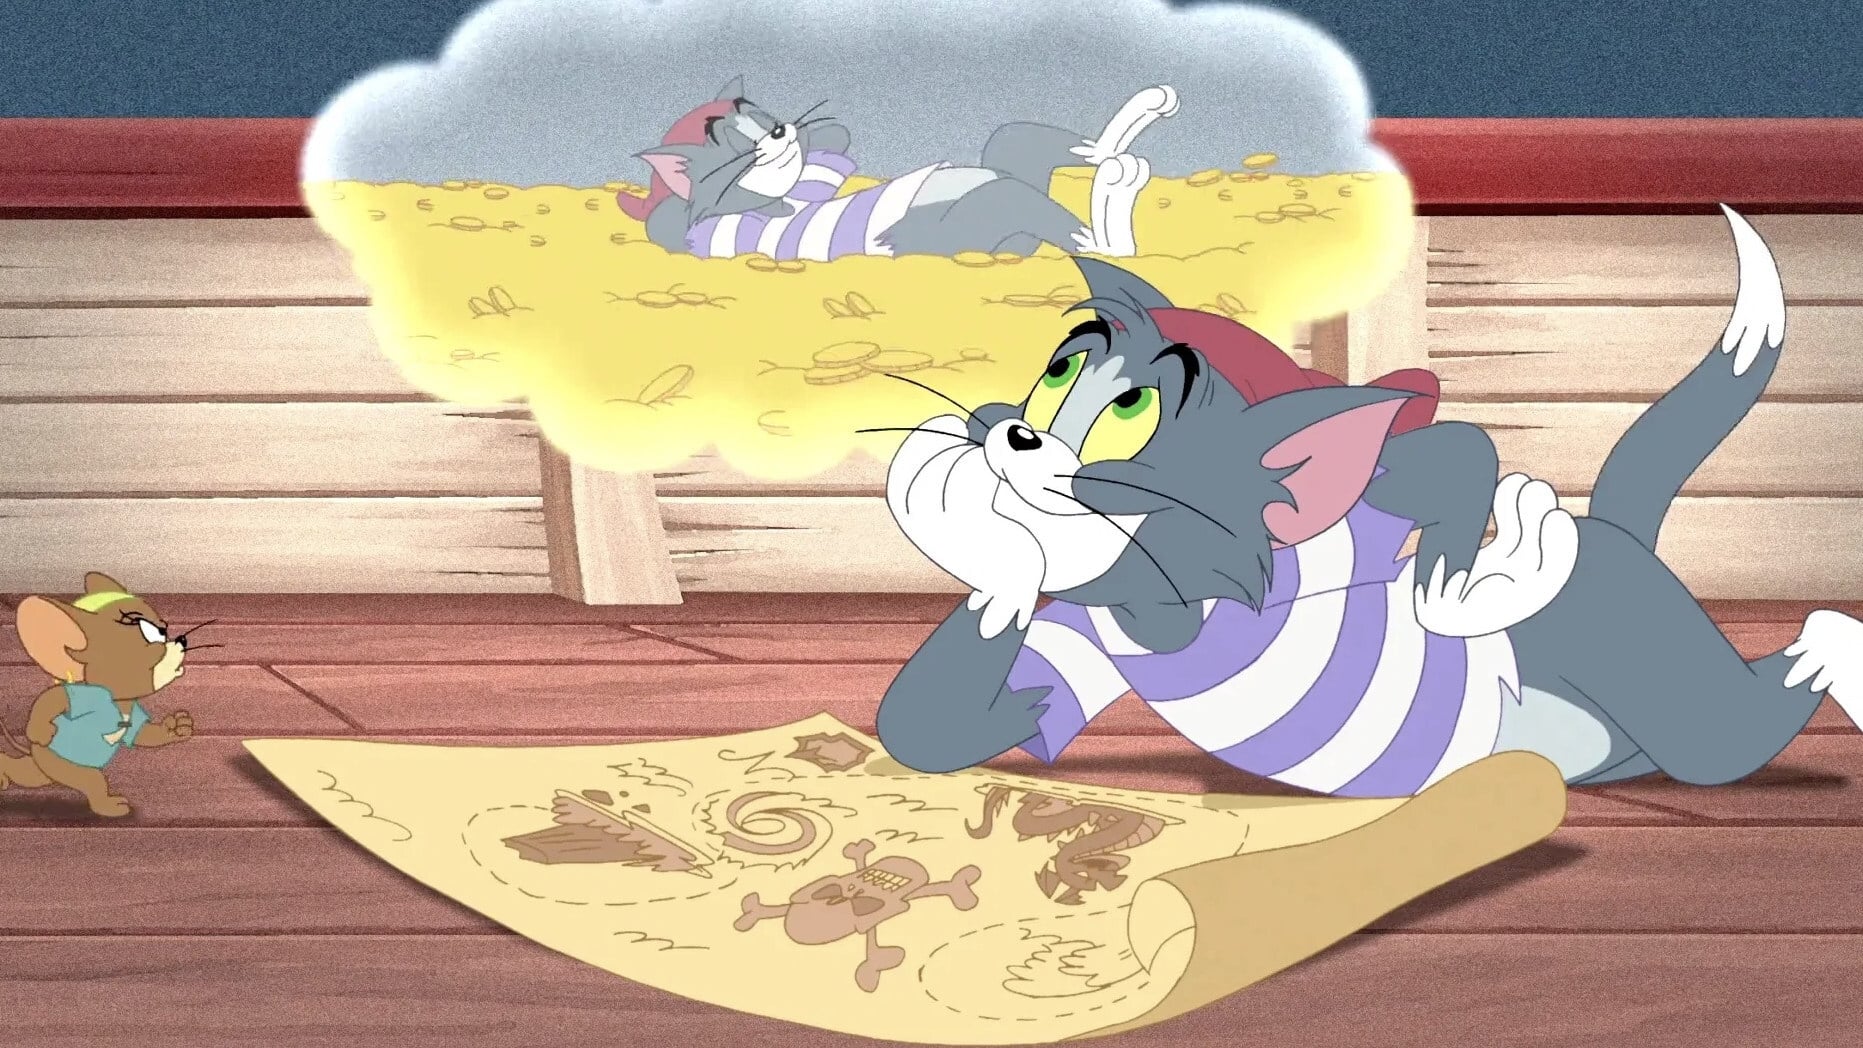 Tom and Jerry: Shiver Me Whiskers 2006 123movies